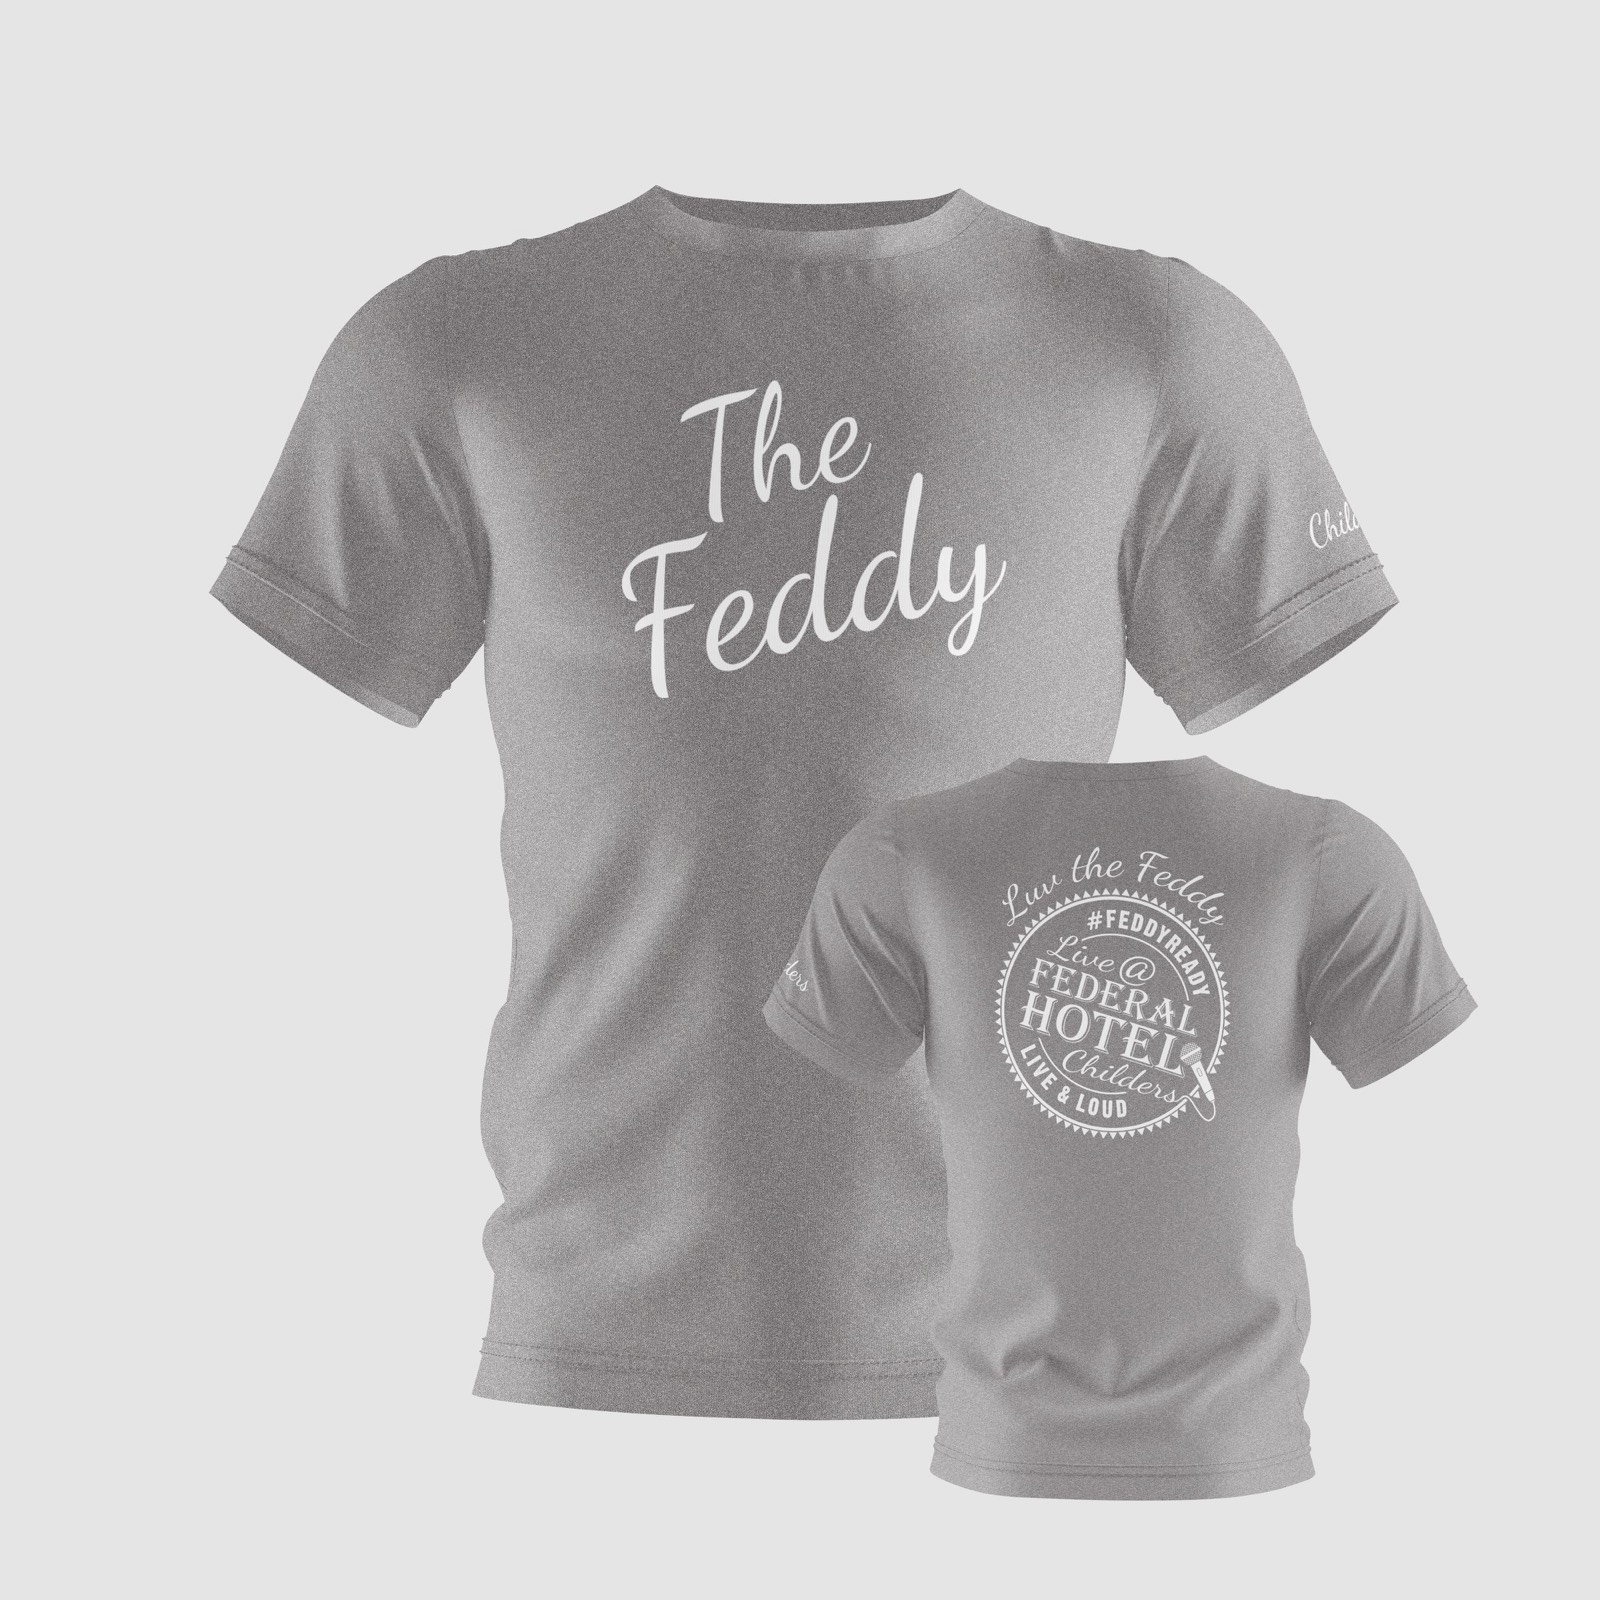 The Feddy printed T-shirt front and back - Grey